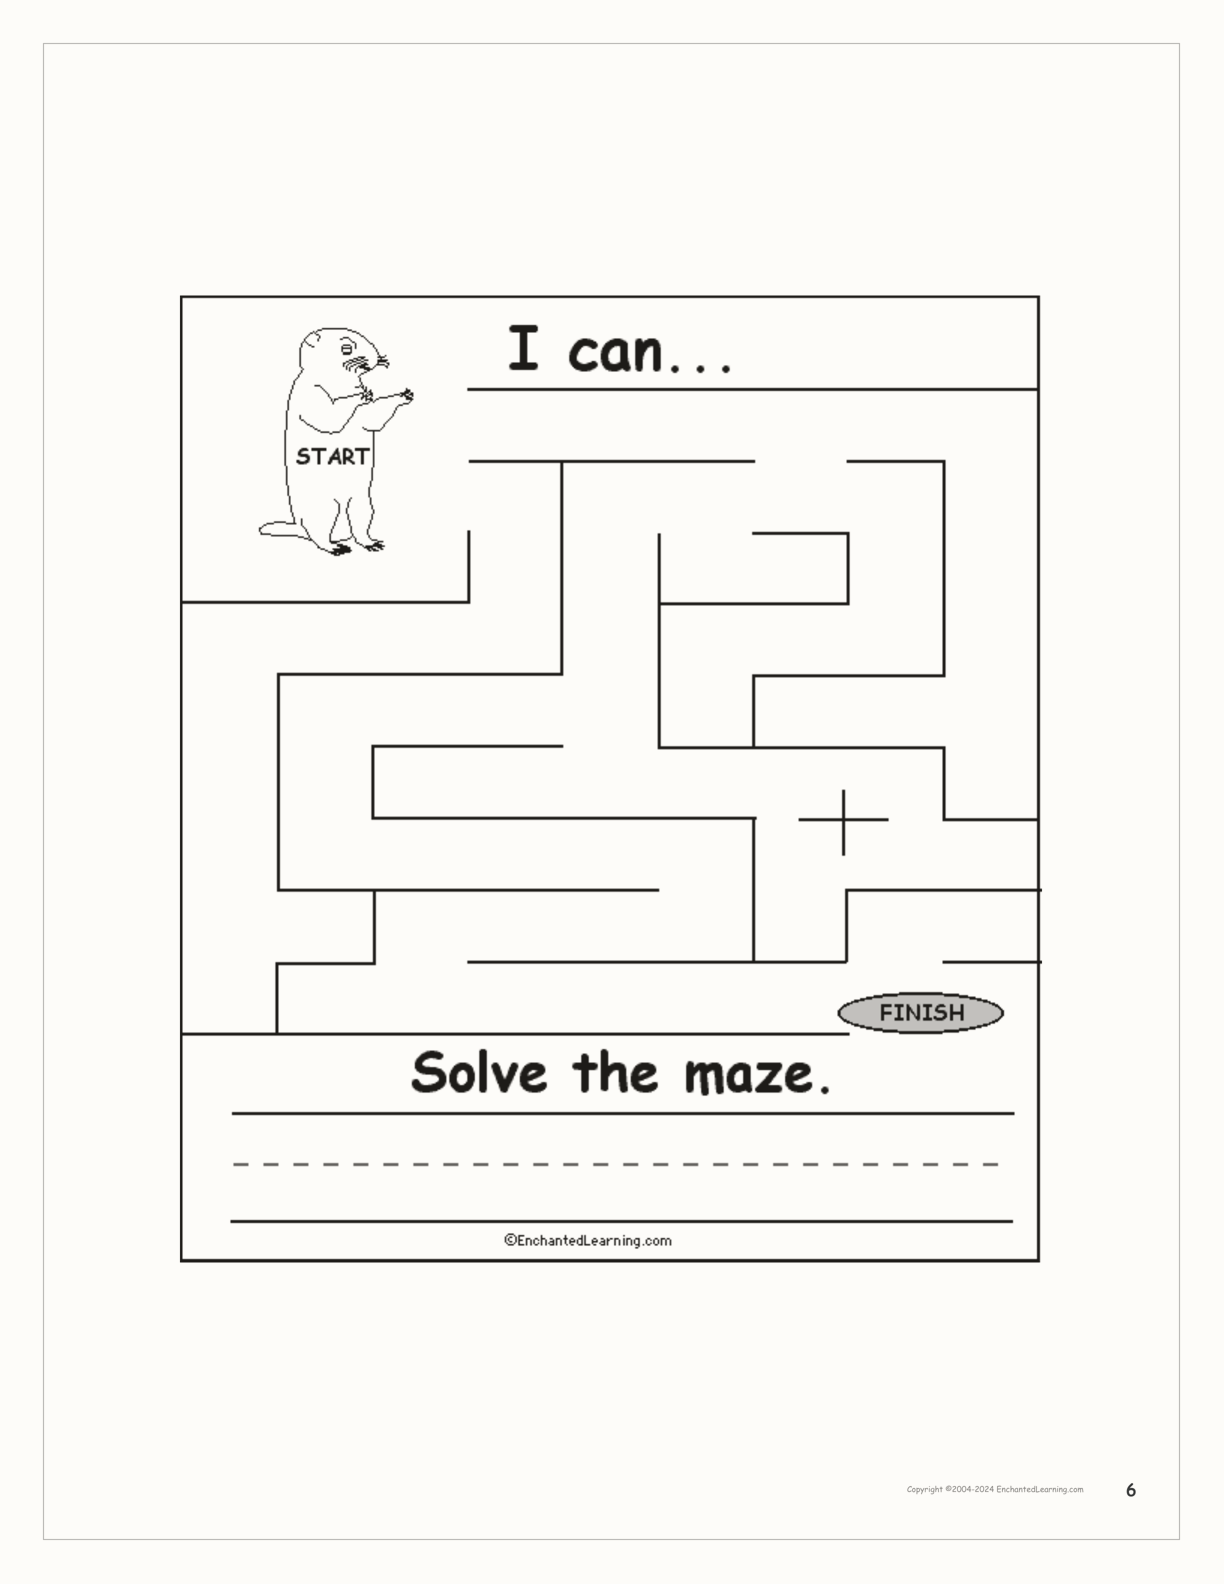 Groundhog Day 'I Can' Book interactive worksheet page 6